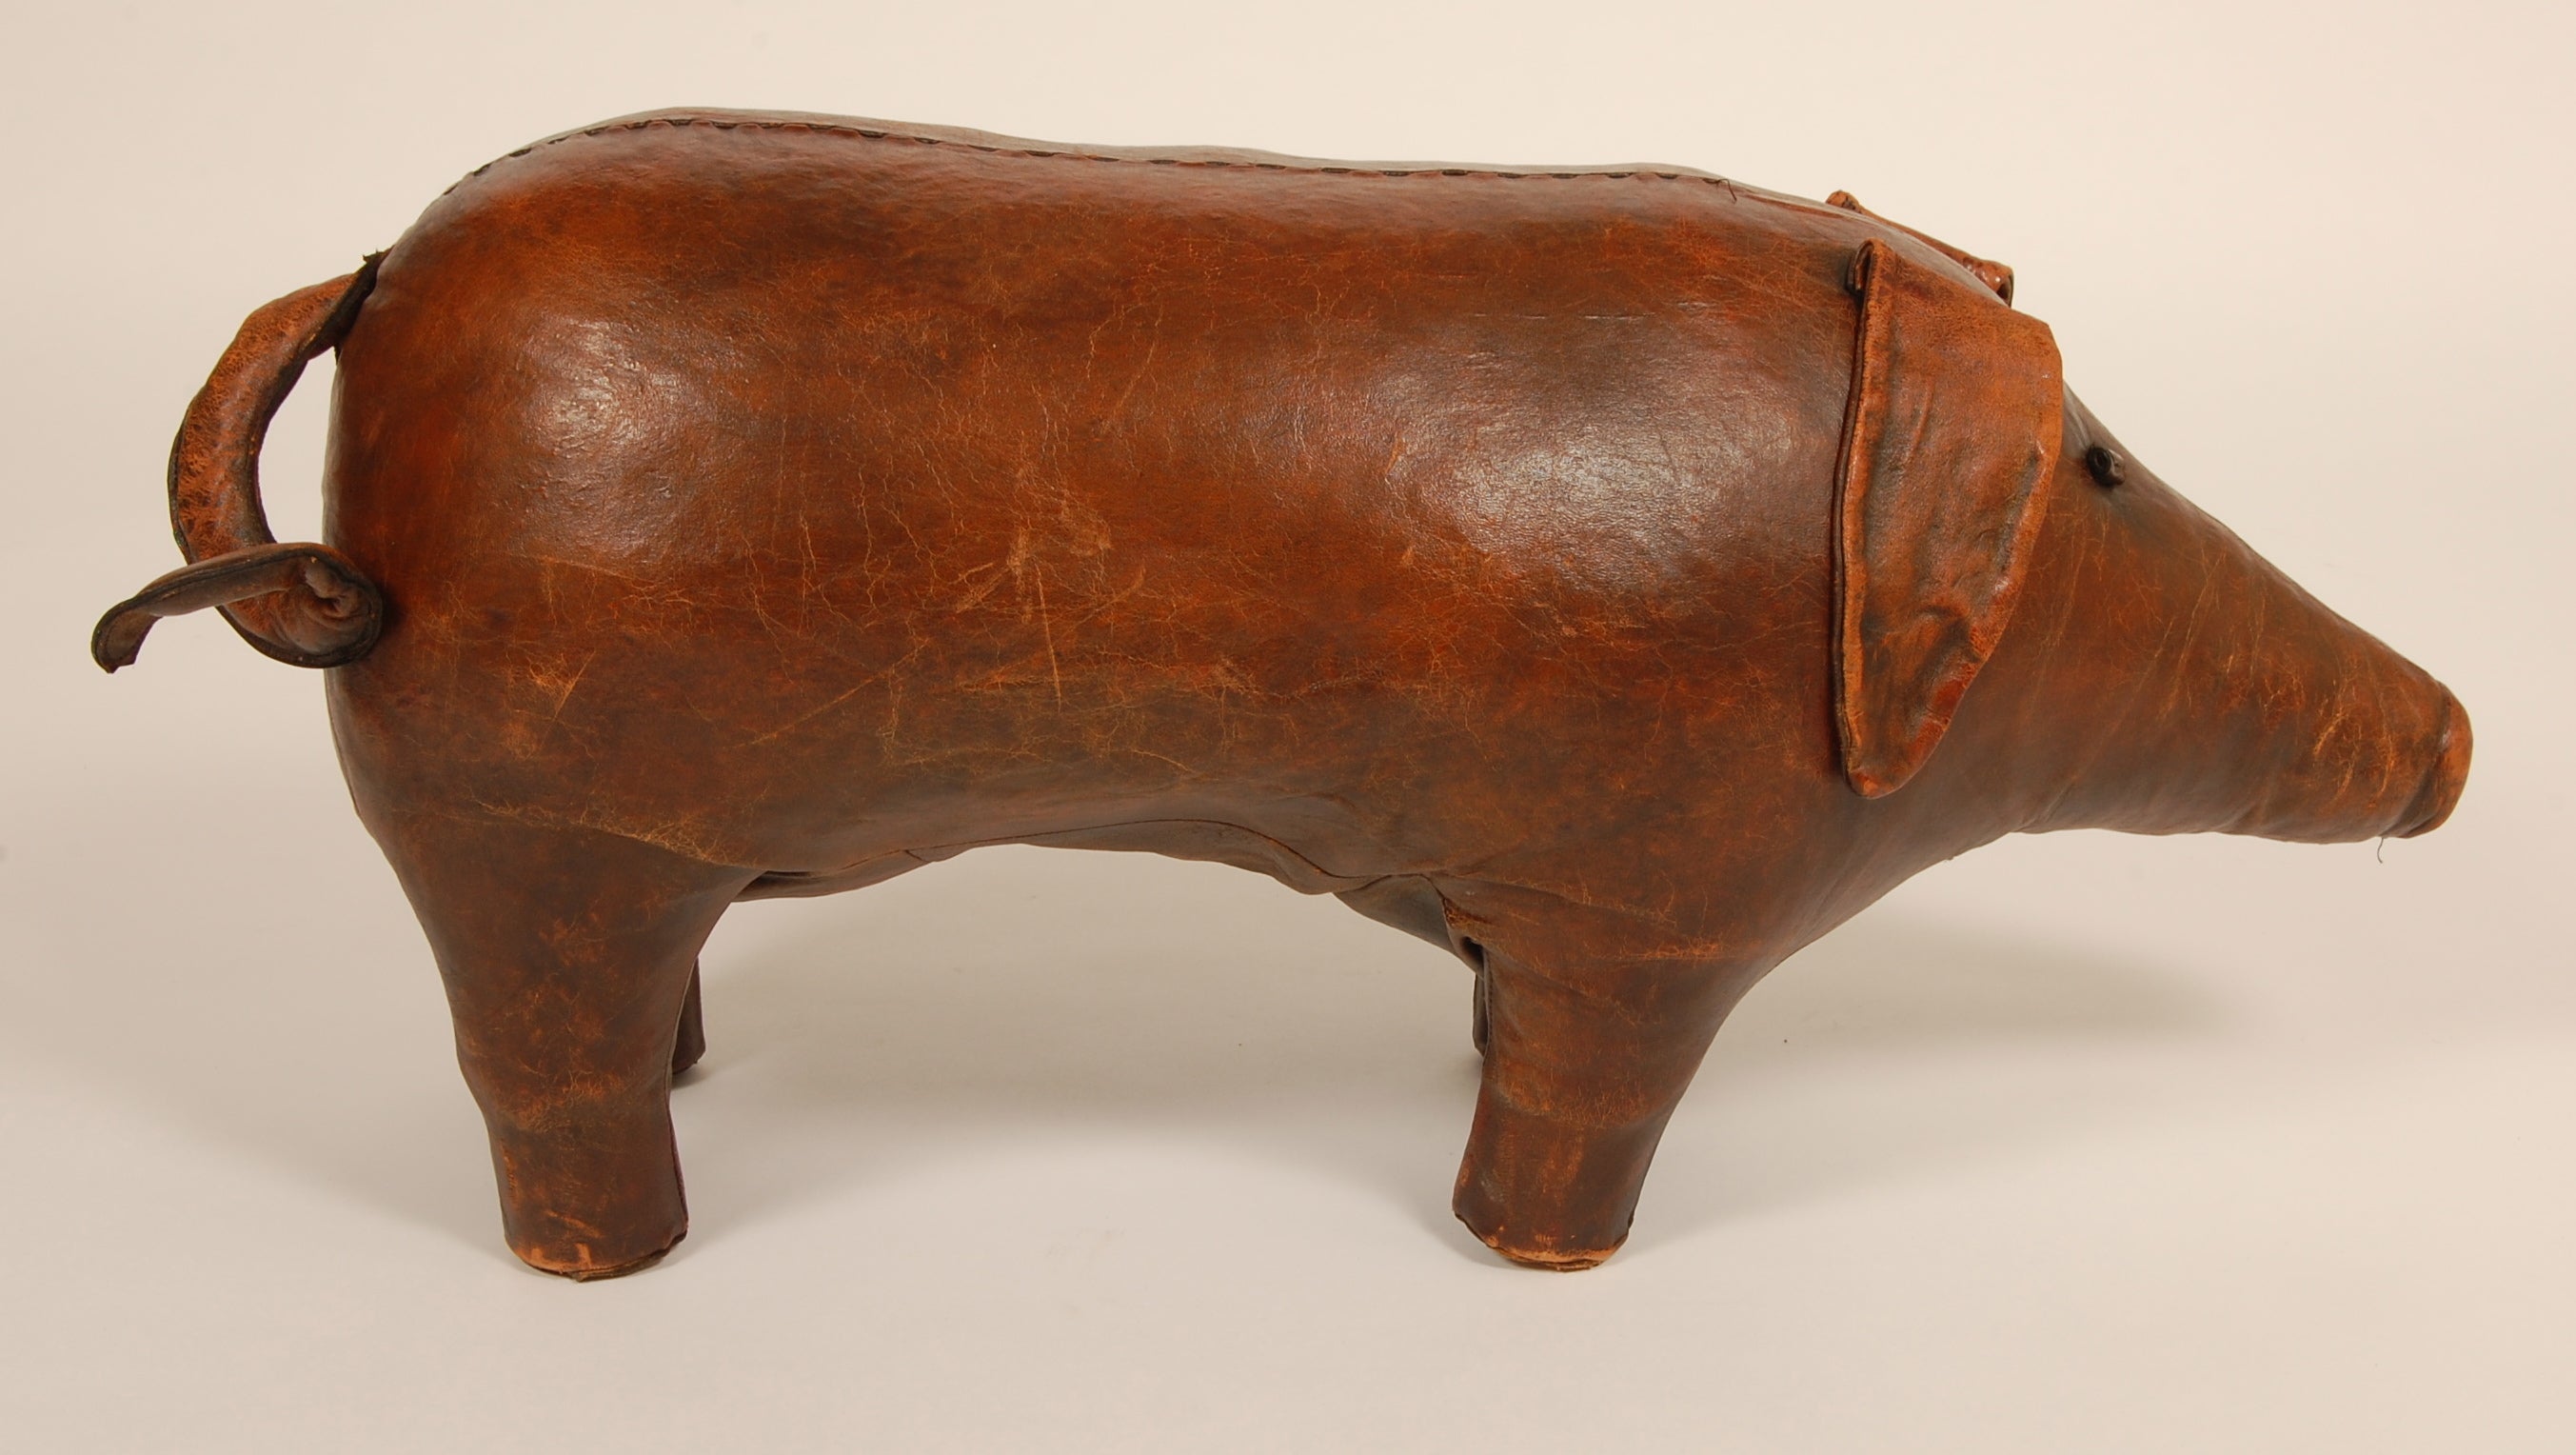 Abercrombie & Fitch Leather Pig